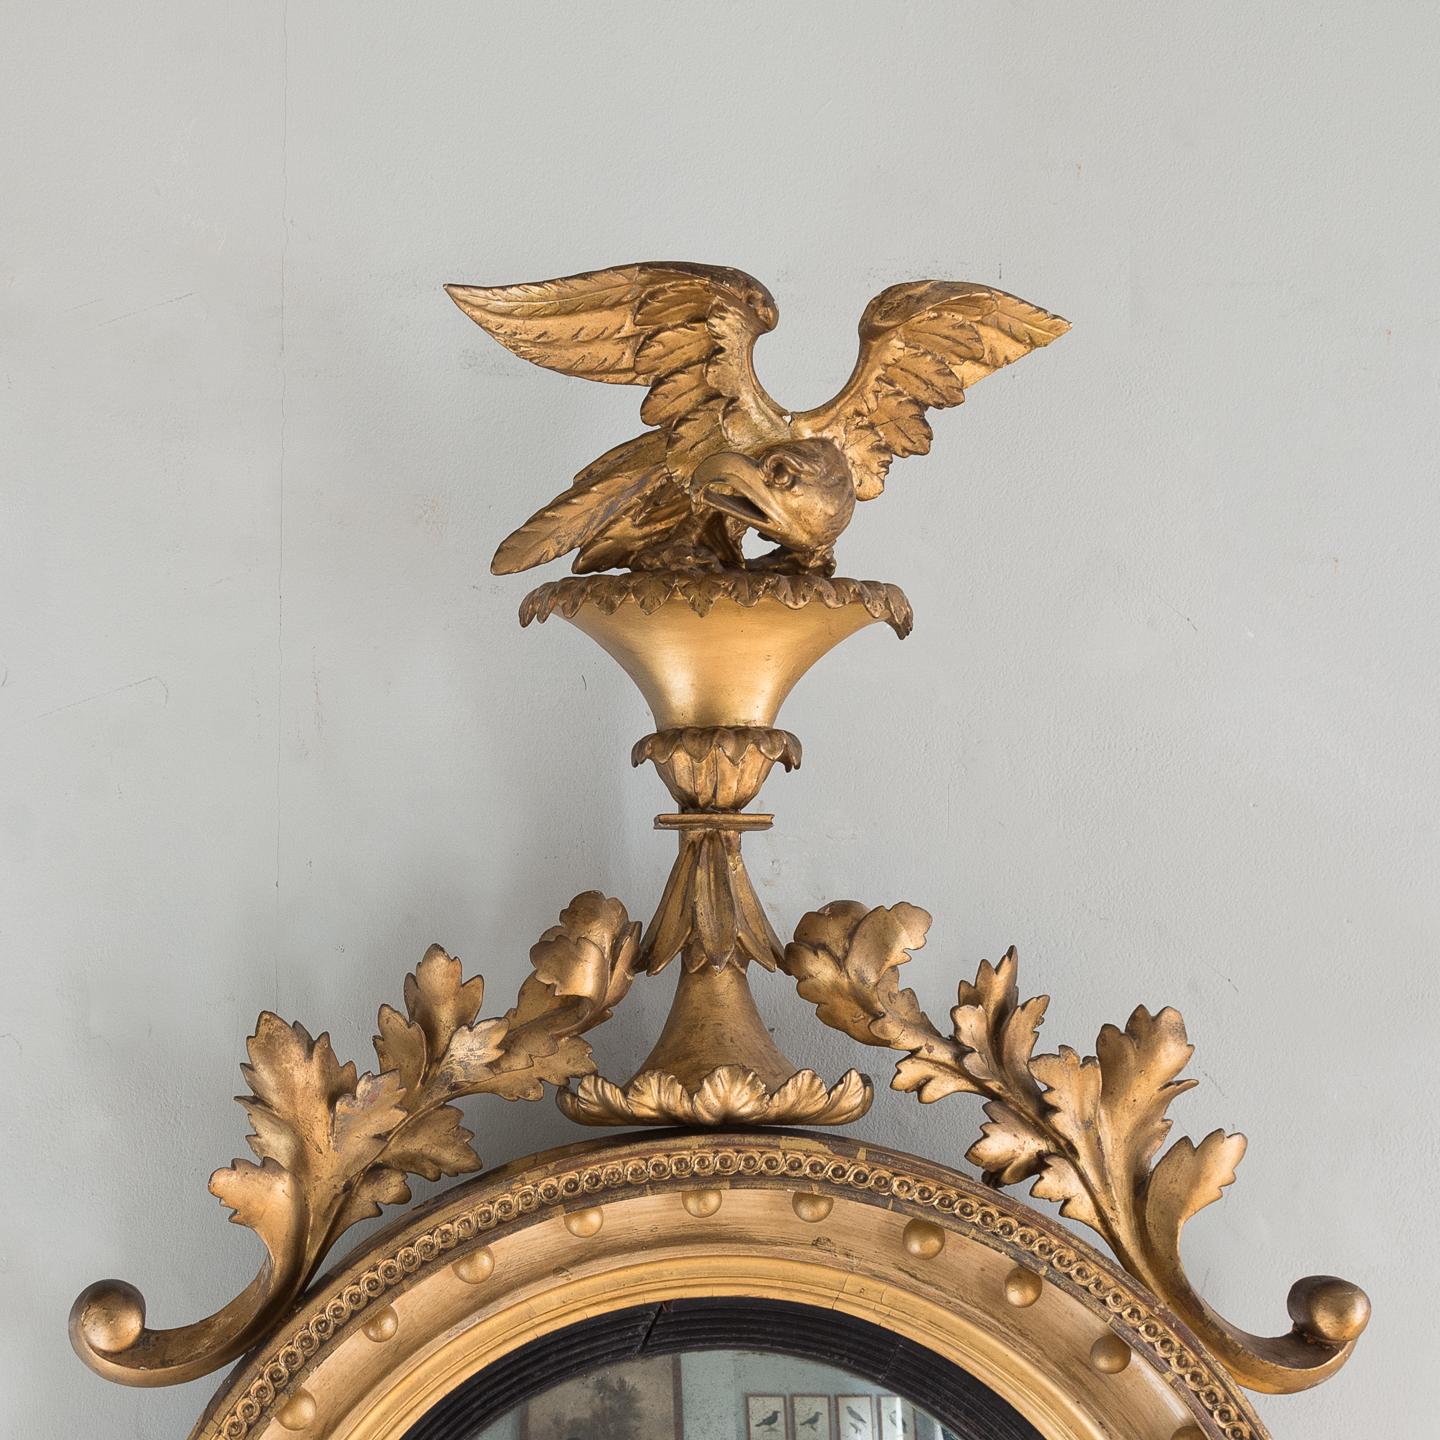 Regency giltwood convex mirror, English, circa 1825, with well carved eagle on a rocky outcrop above interlocking leaf and scrolls leading to detailed circular frame including giltwood ball decoration, reeded ebonised slip and foxed mirror plate.